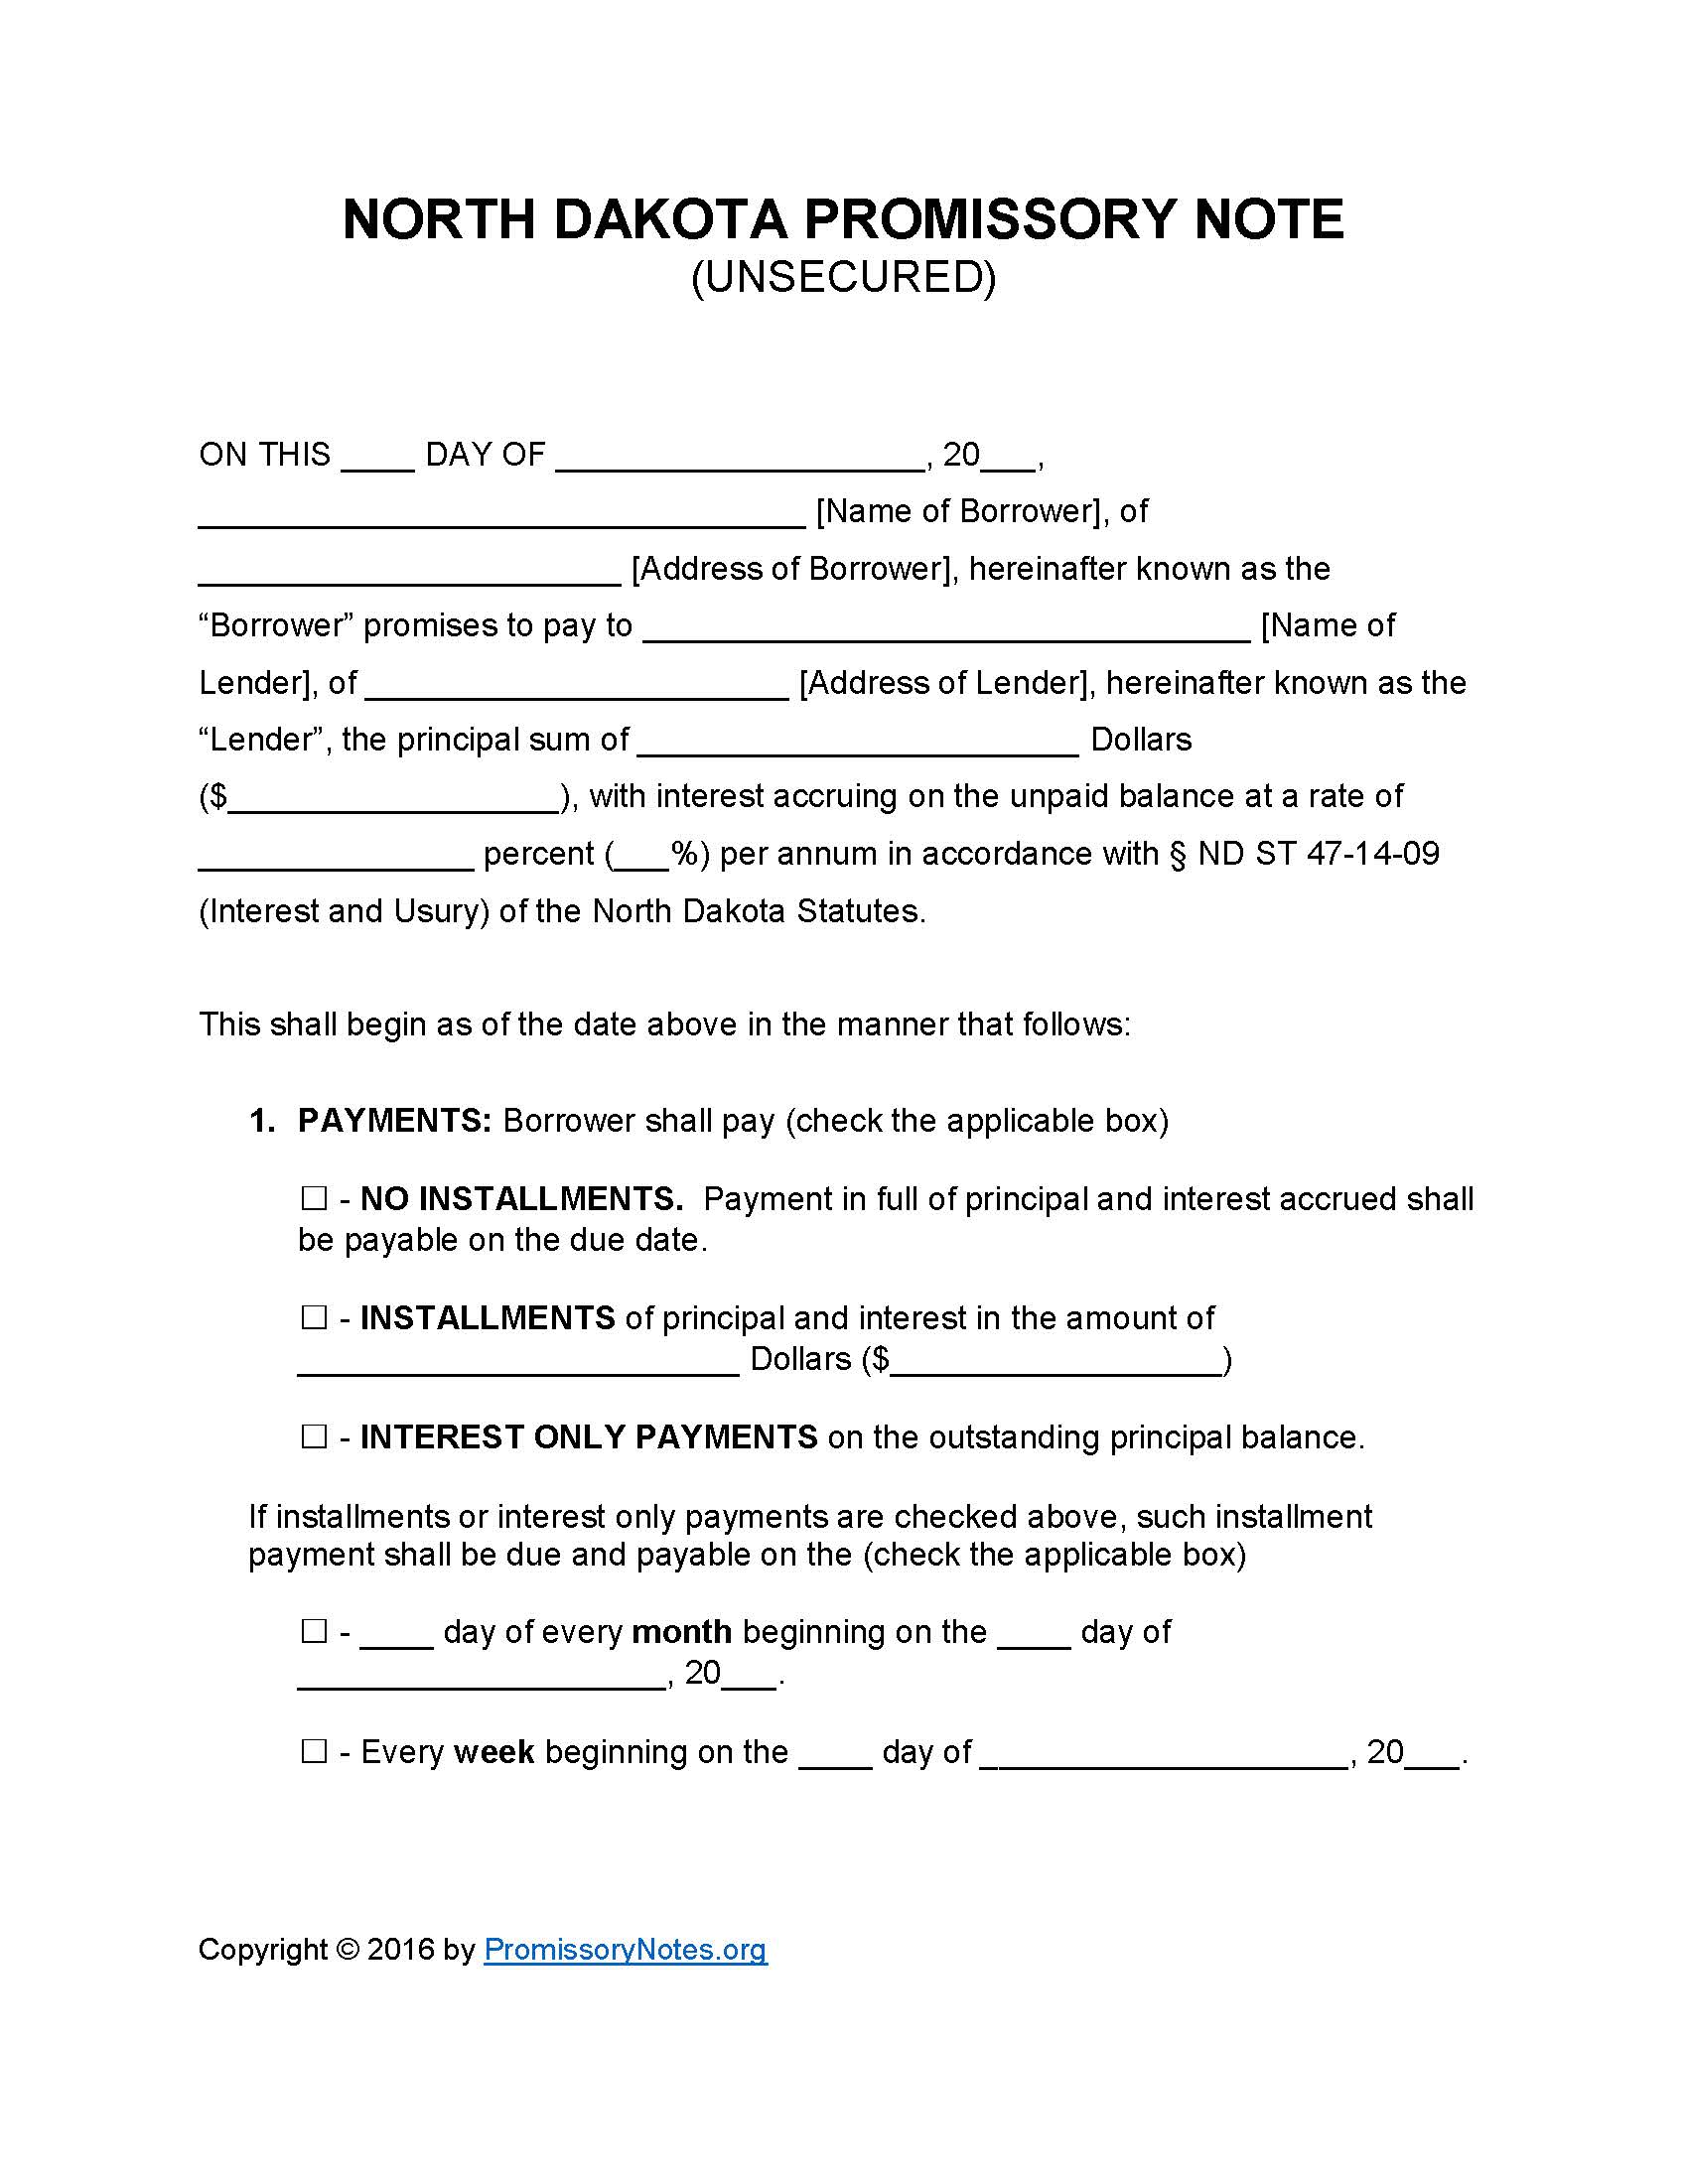 north-dakota-unsecured-promissory-note-form